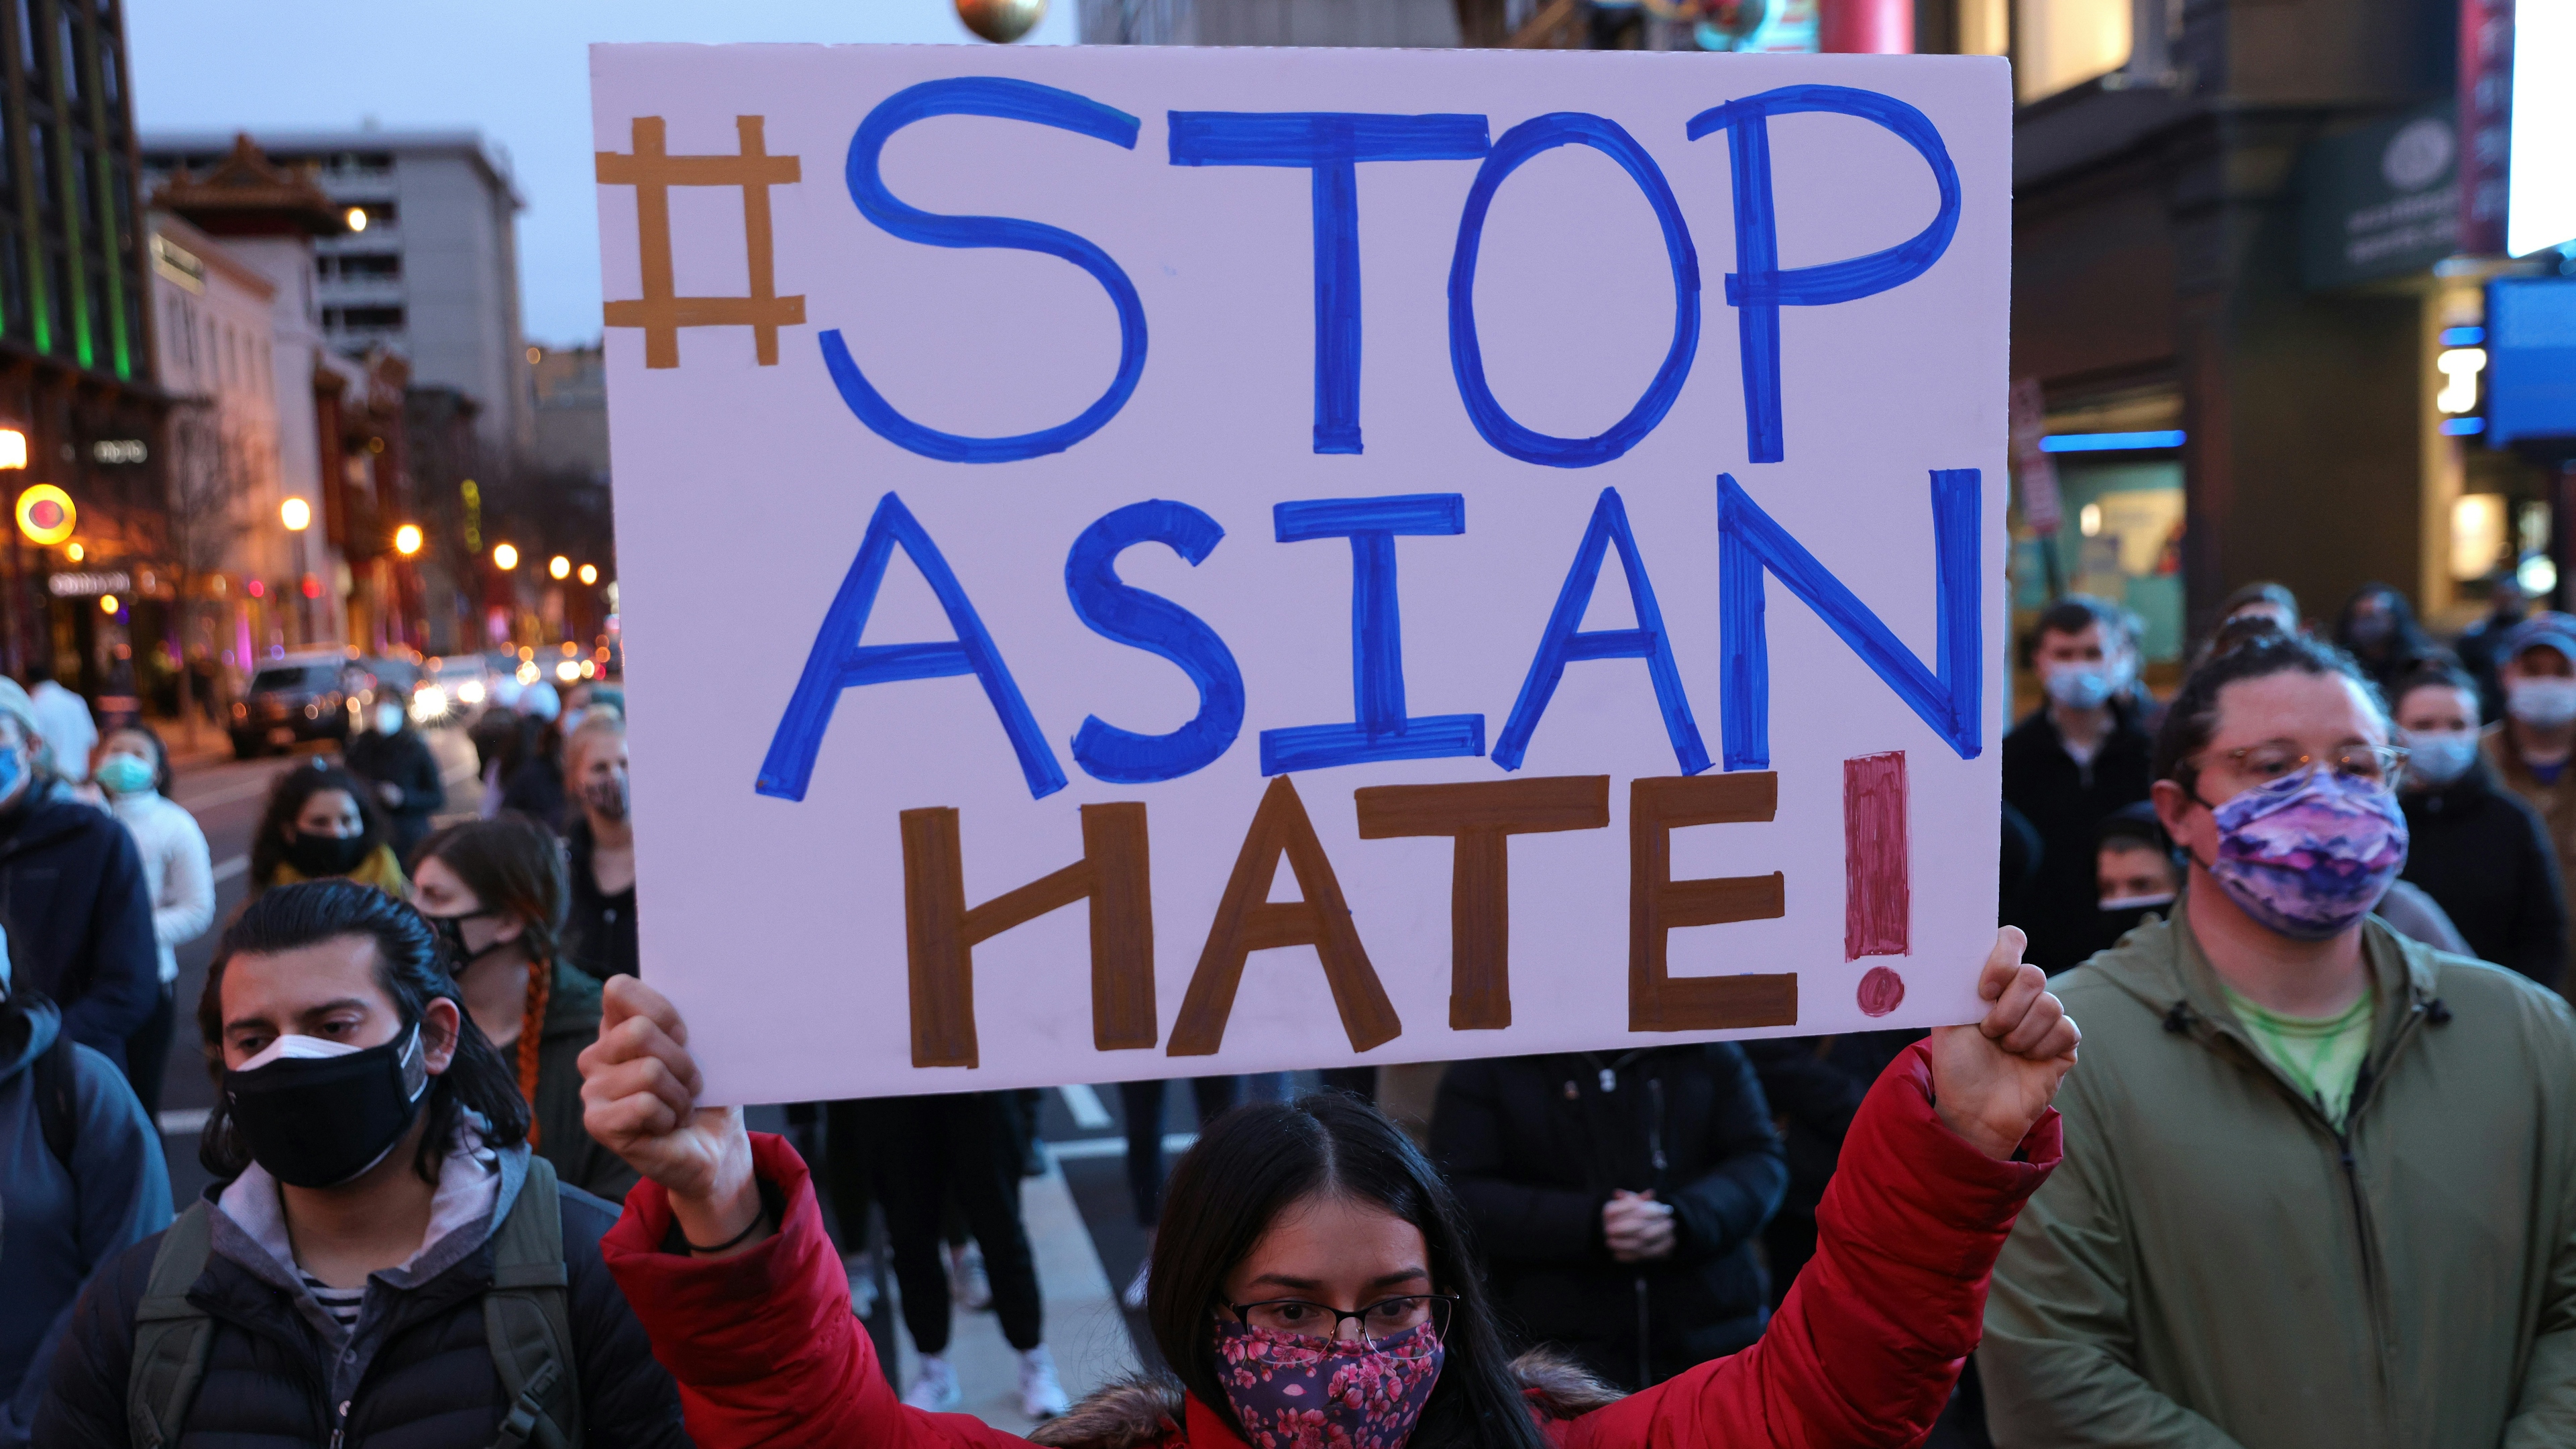 Activists participate in a vigil in response to the Atlanta spa shootings March 17, 2021 in the Chinatown area of Washington, DC.